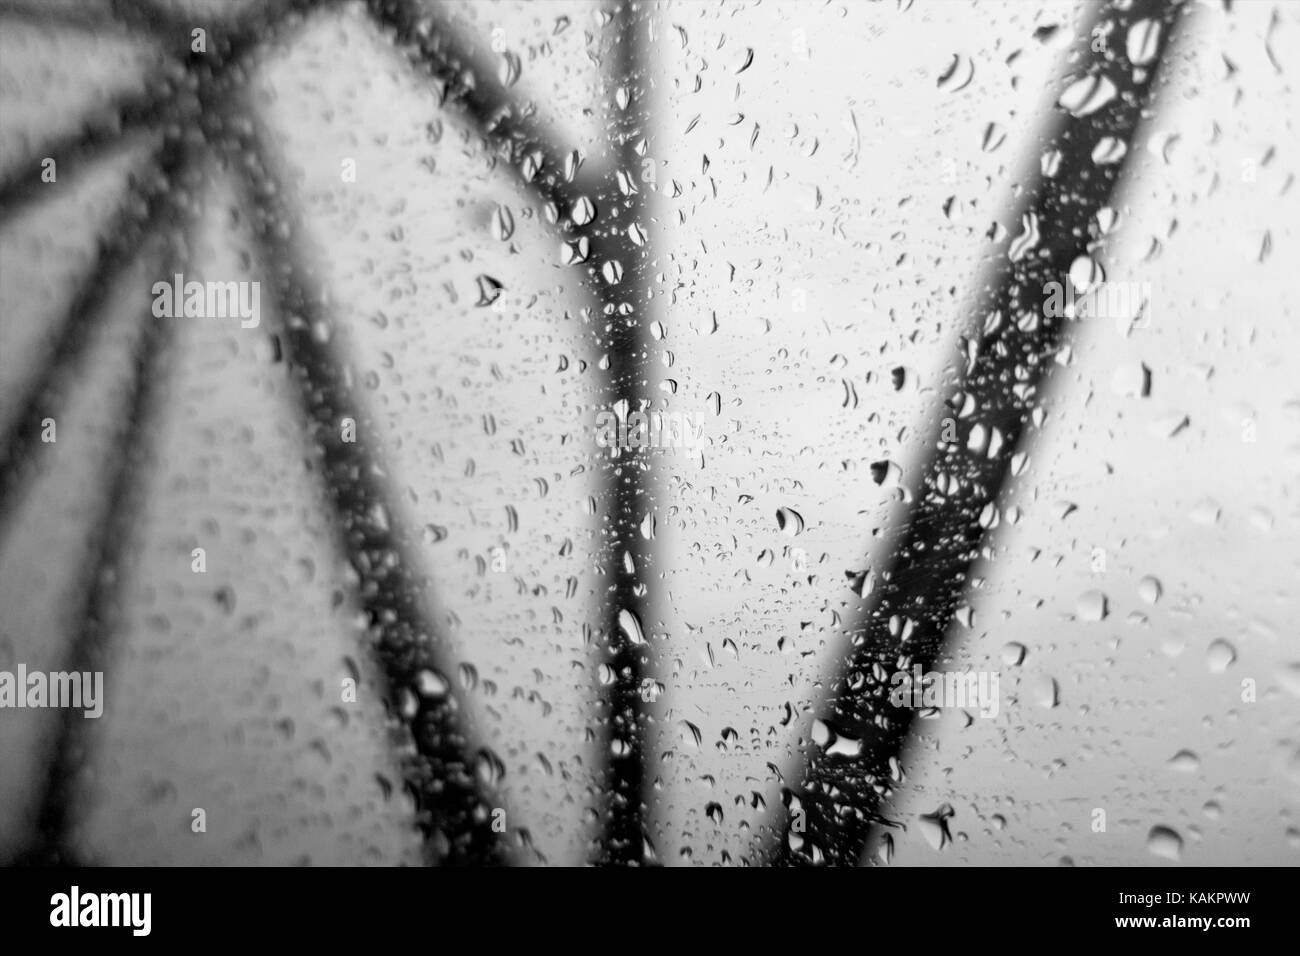 Looking out of windows covered with water droplets at black bridge struts on a gray sky. Concept. Stock Photo